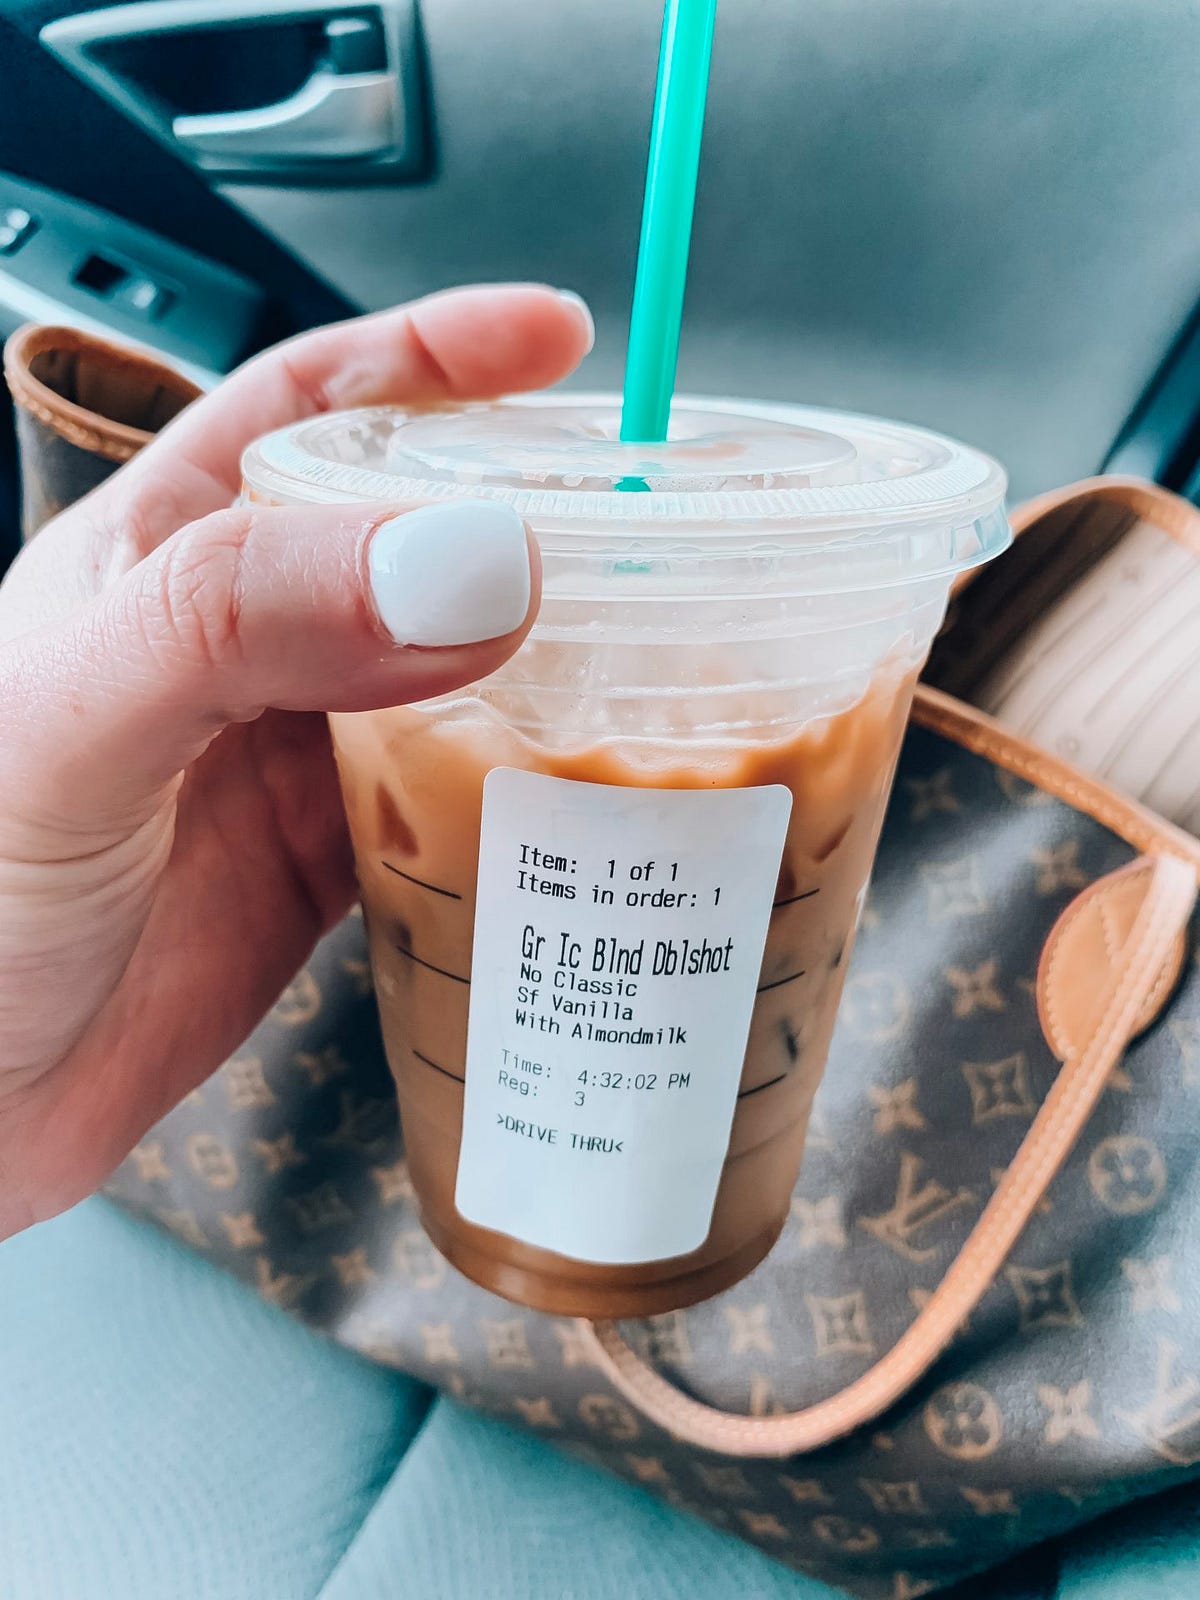 How to Properly Order Your Drink at Starbucks | by Nolan Black | Medium